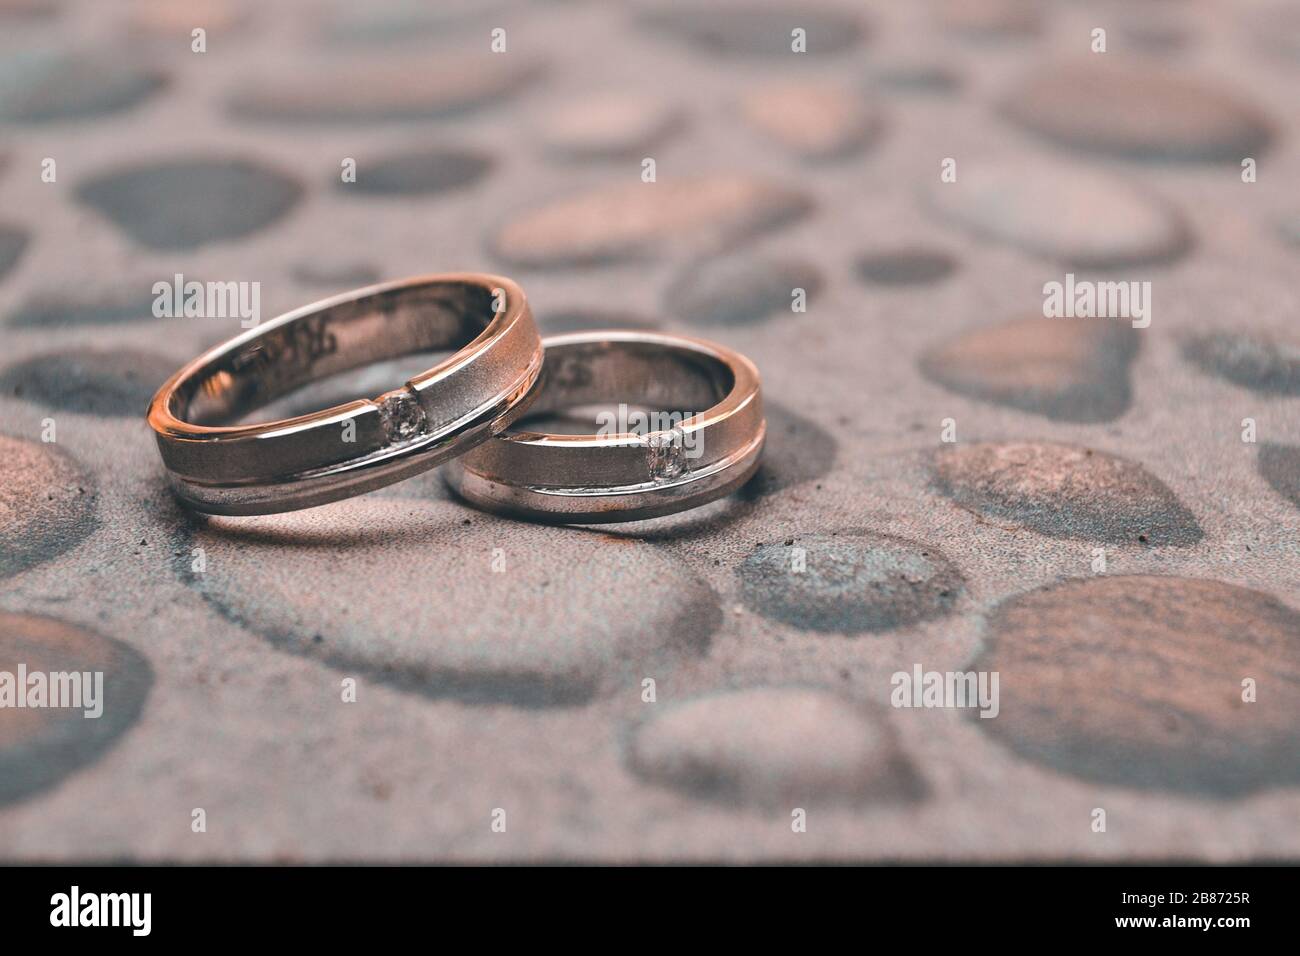 A pair of engagement rings as a symbol of two people's love Stock Photo